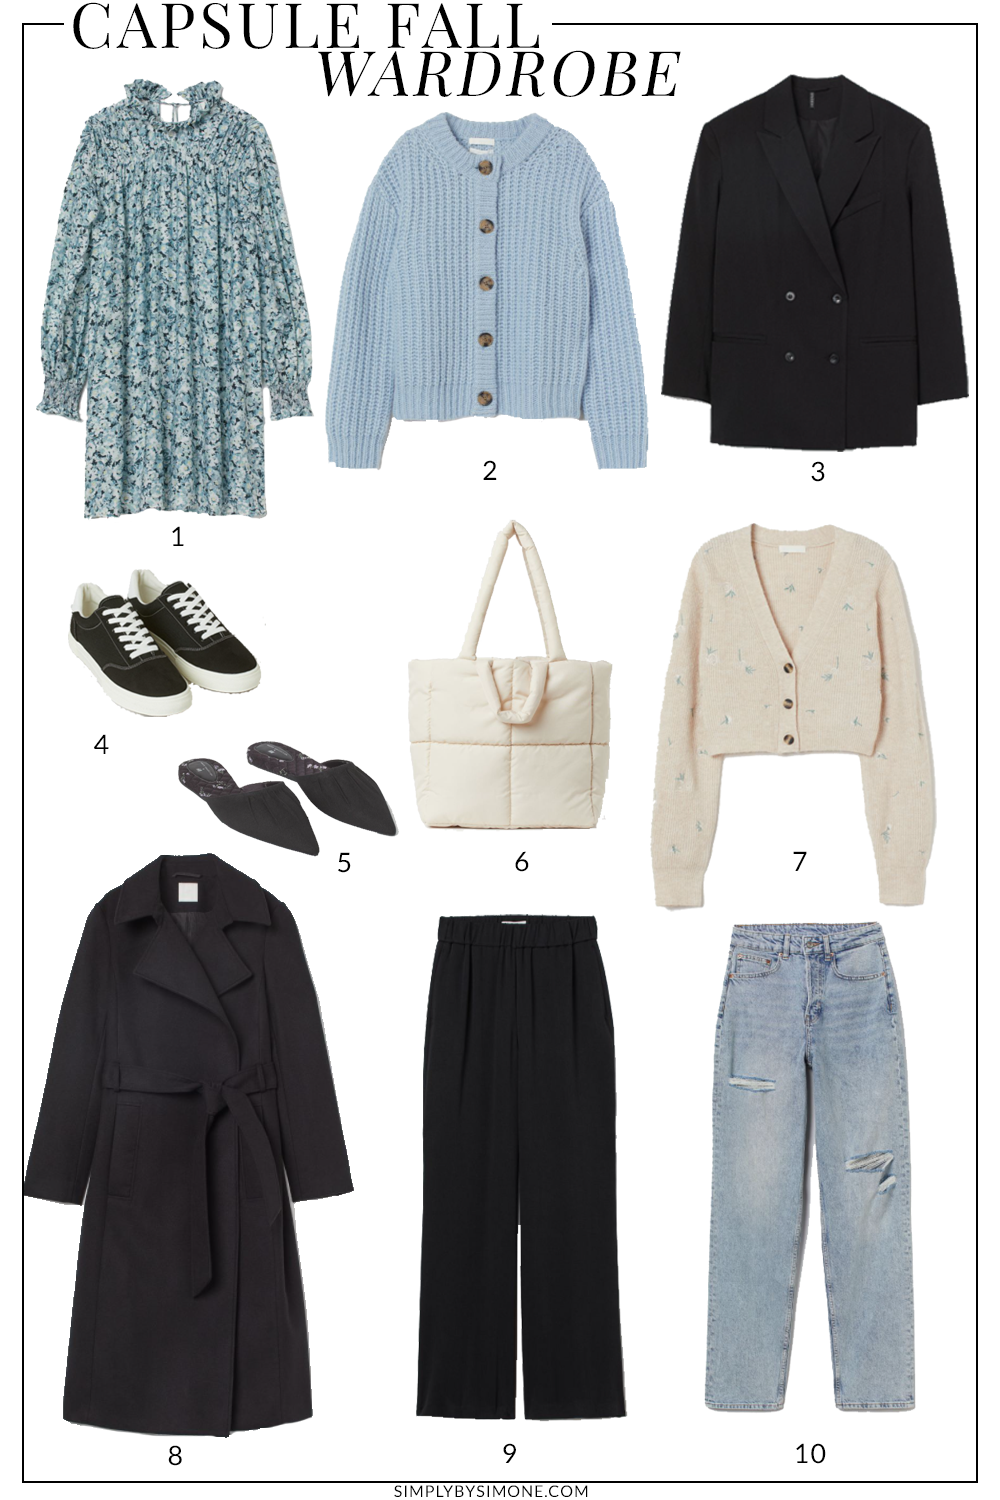 H&M Fall Capsule Wardrobe - living after midnite